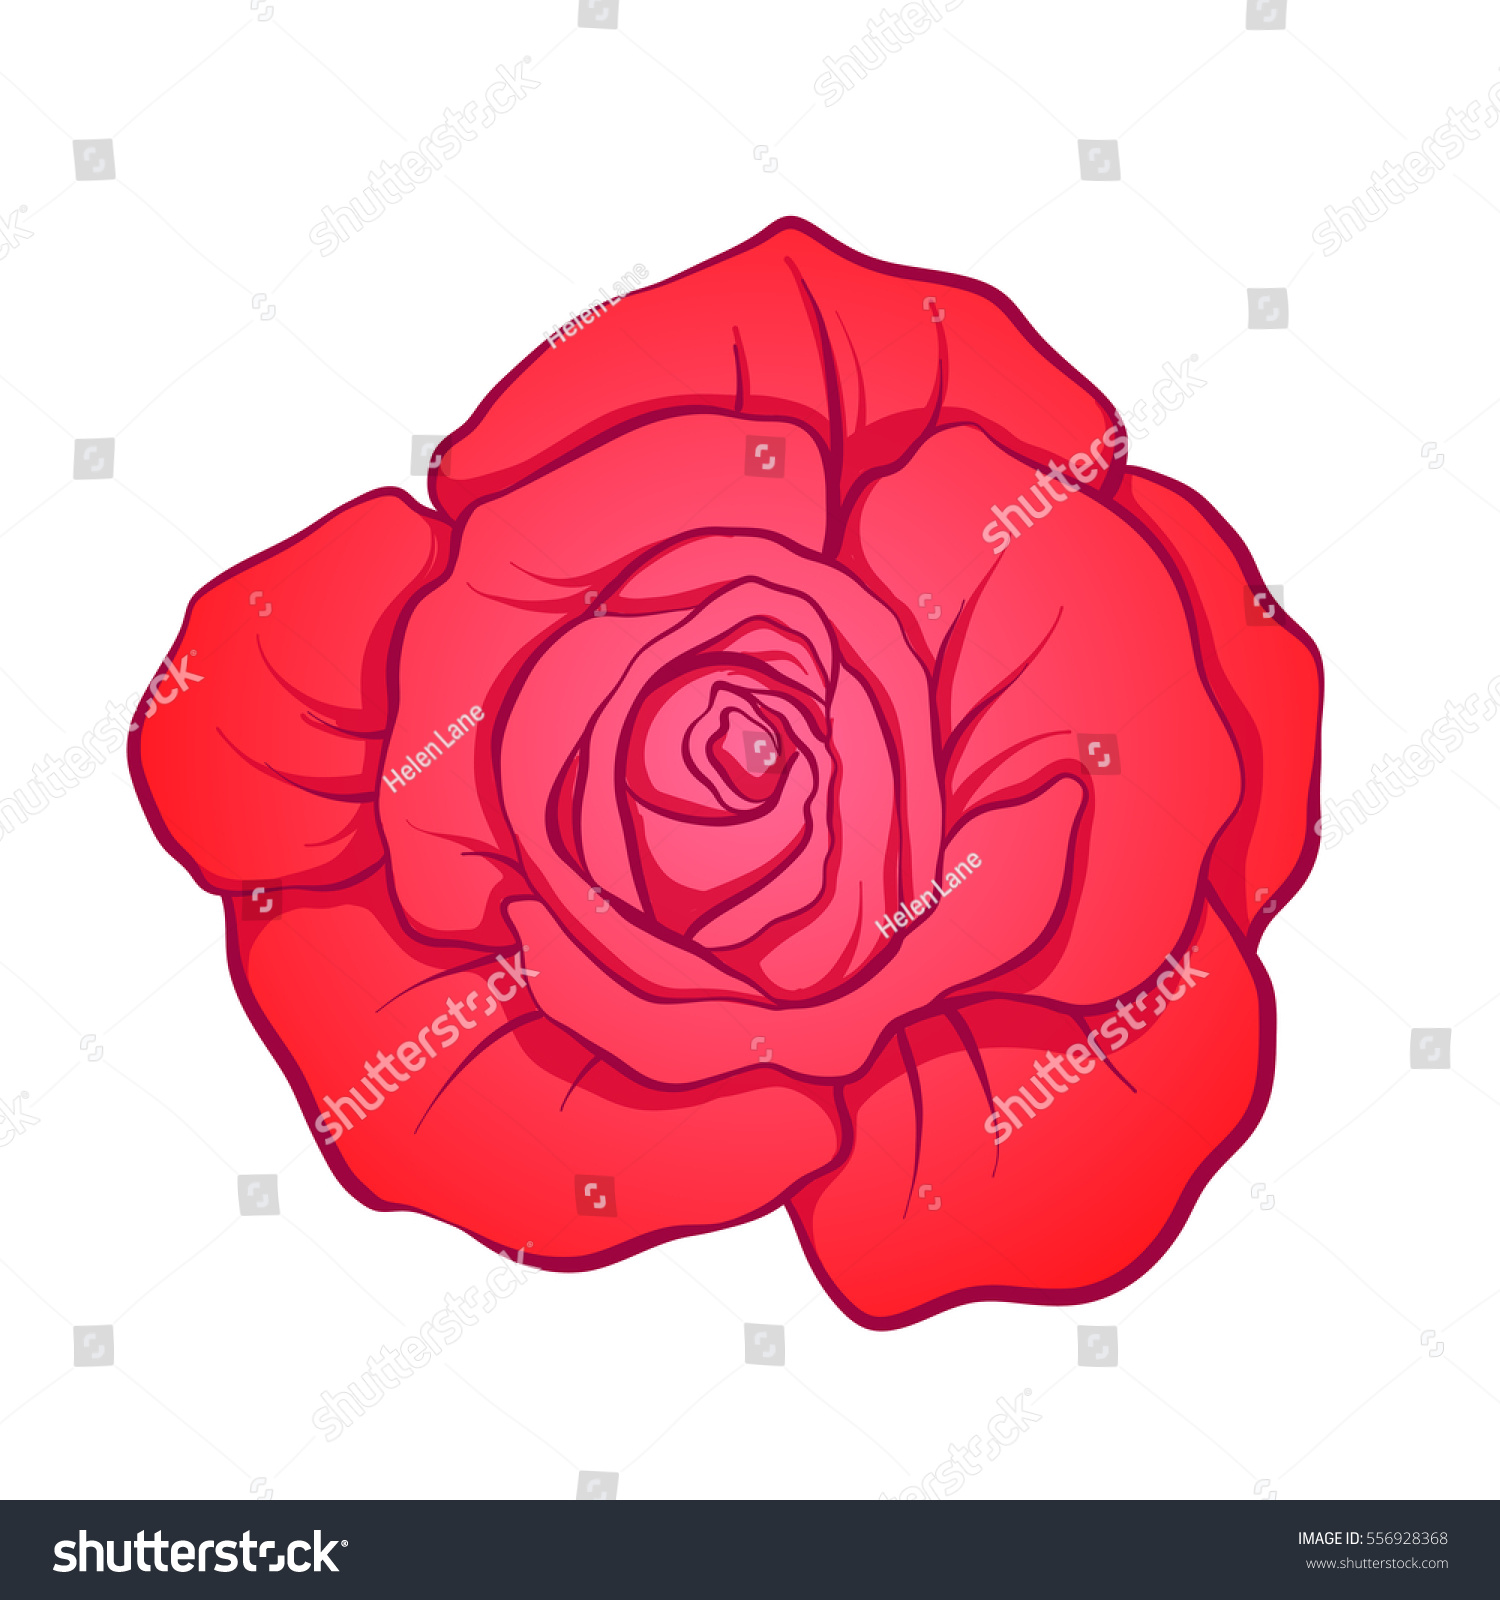 Red Rose Flower Isolated Hand Drawn Stock Vector 556928368 ...